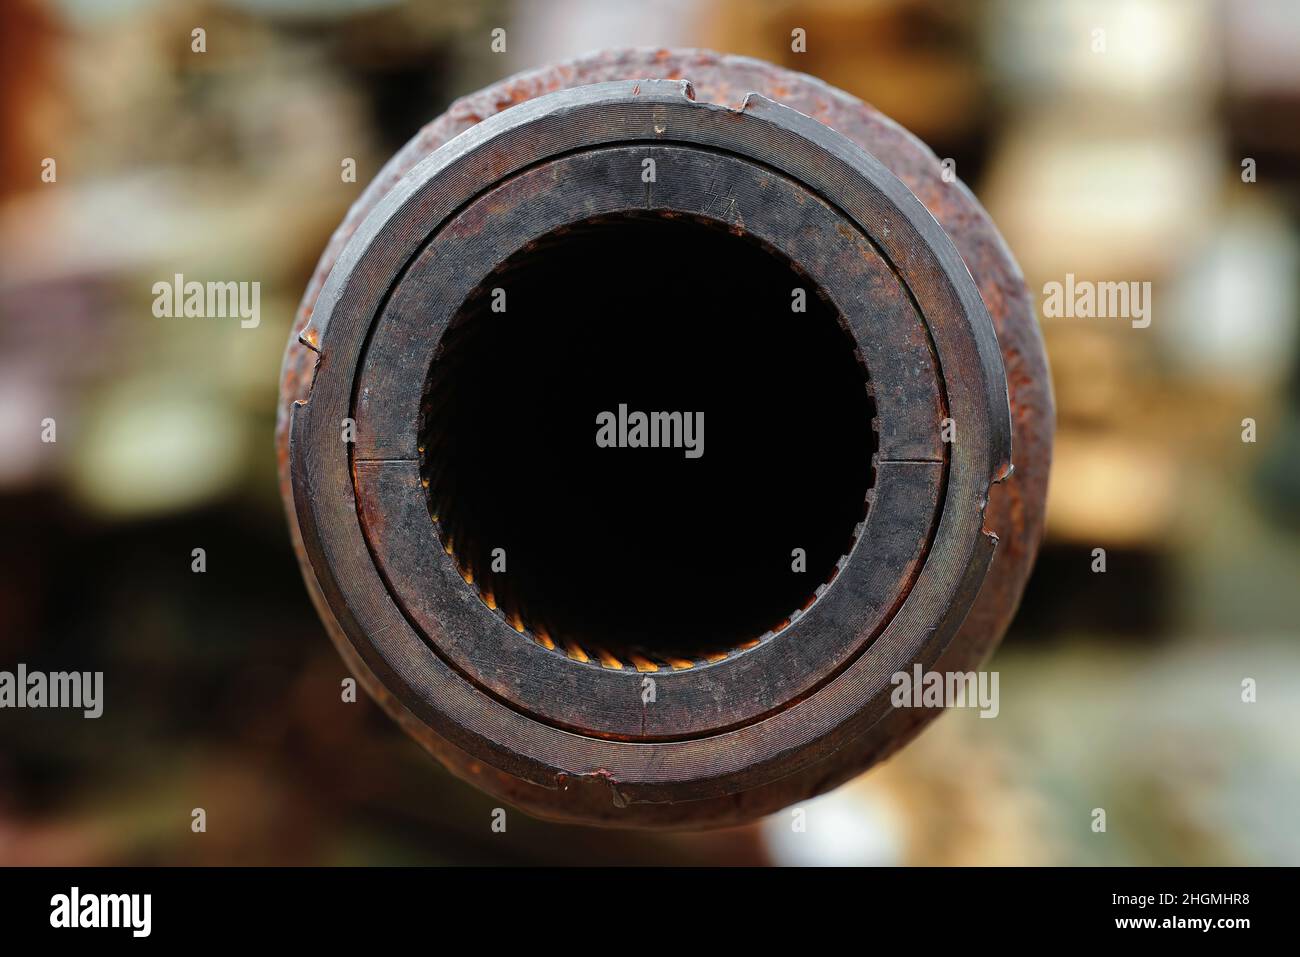 A big gun. The rifled gun of the tank. Close-up of a tank gun barrel with rifling. Abstract background of the armed conflict. Stock Photo